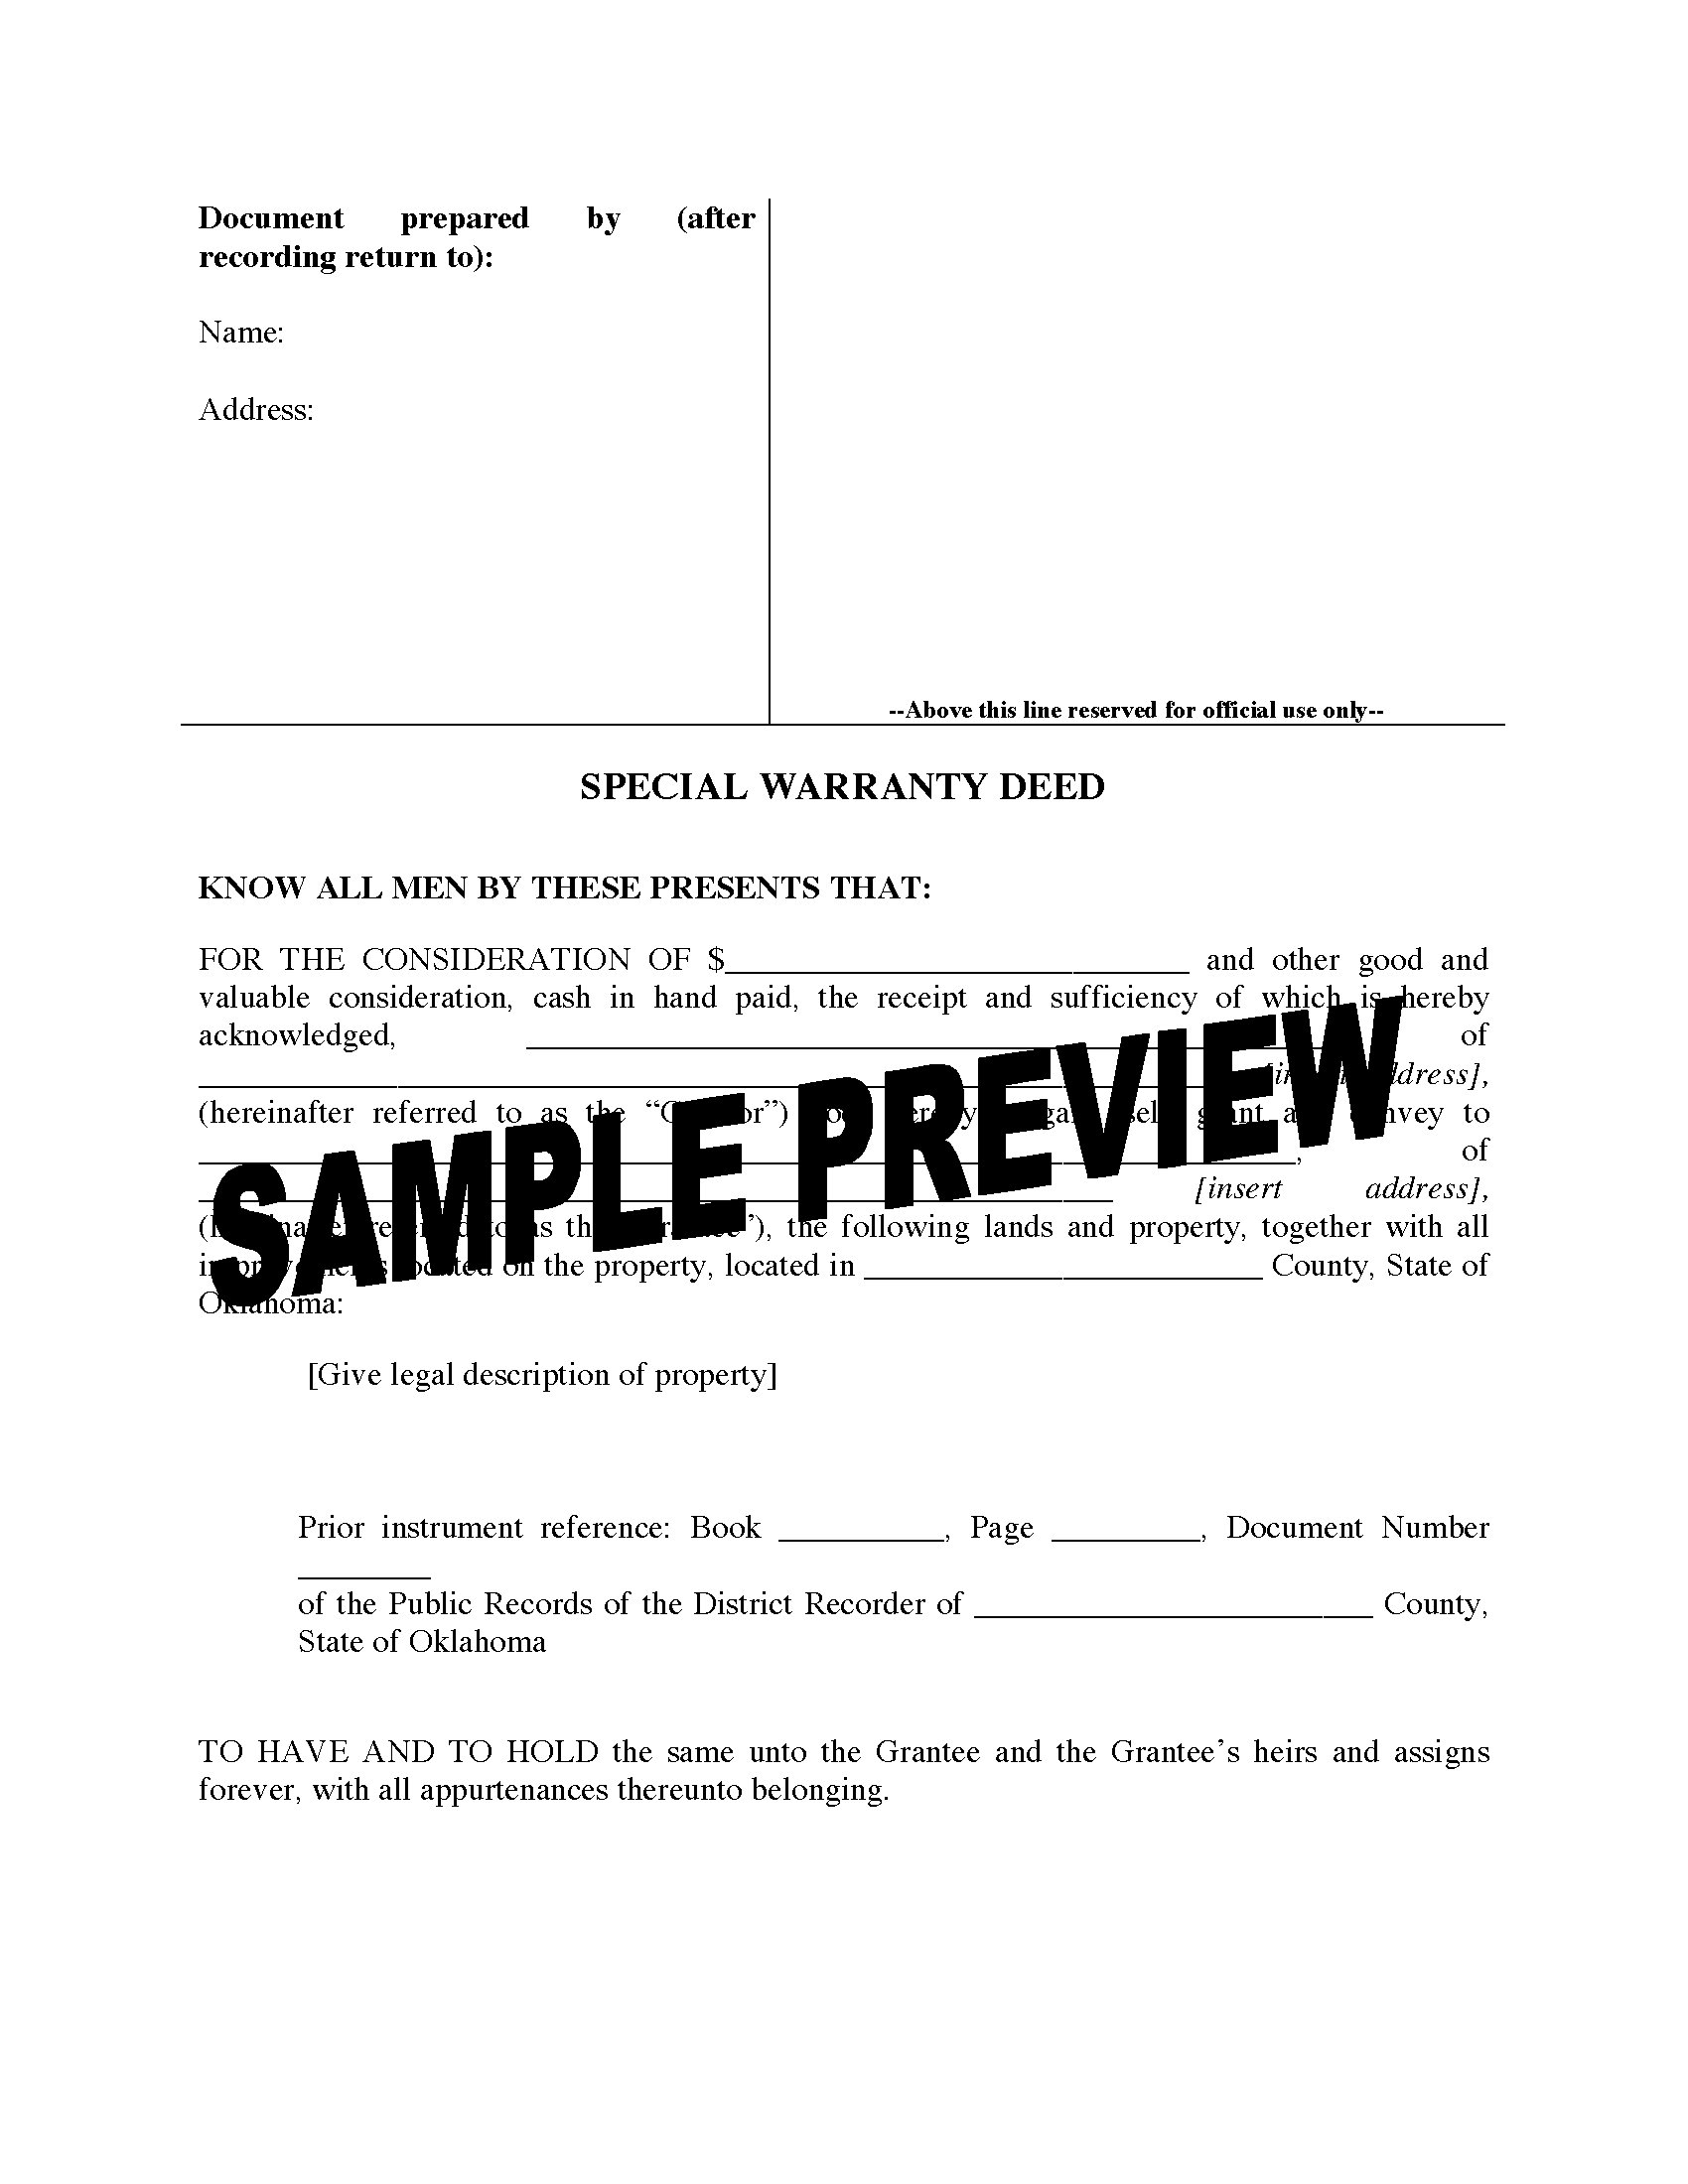 oklahoma-special-warranty-deed-legal-forms-and-business-templates